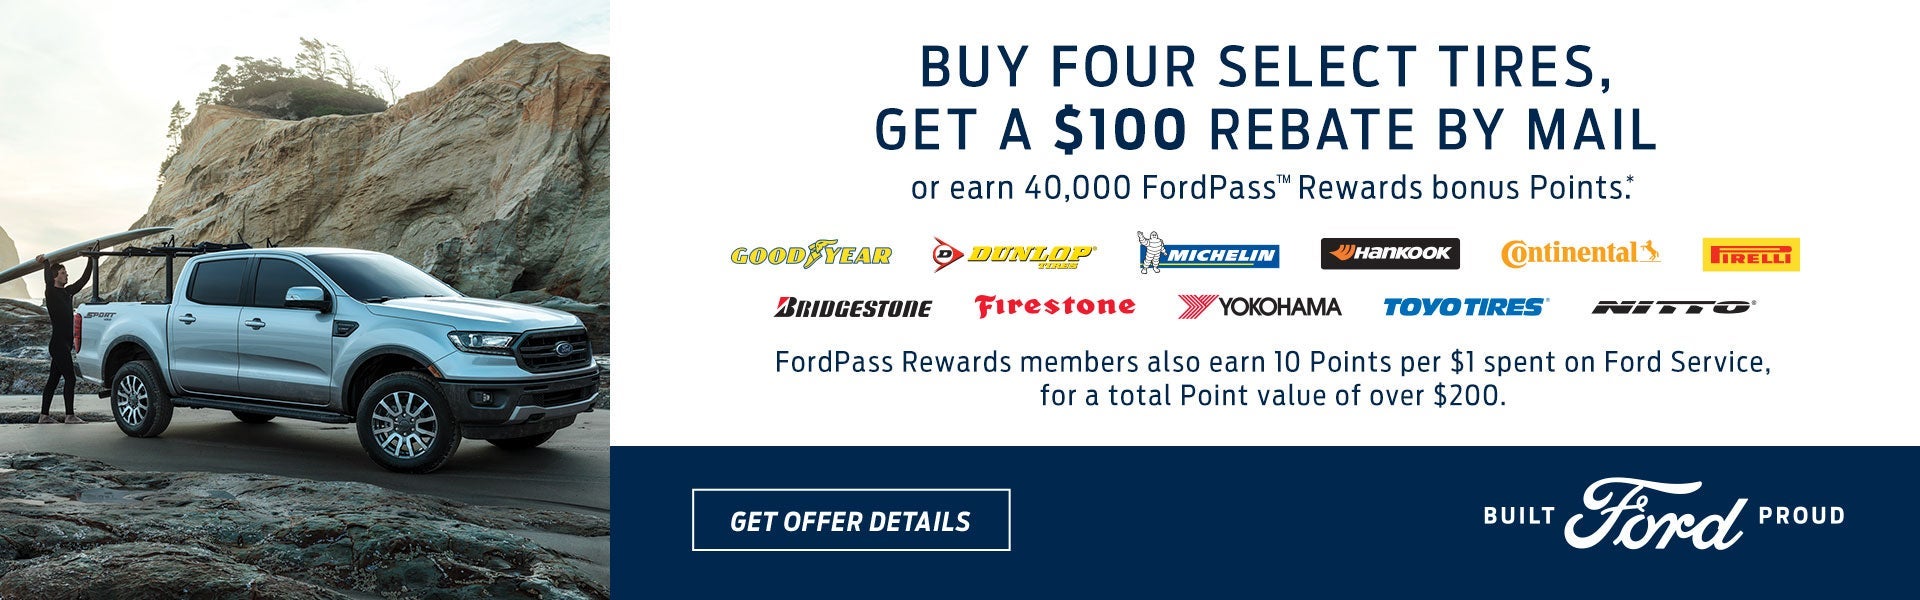 Get a $100 Mail-In Rebate | Sarchione Ford of Randolph in Randolph OH